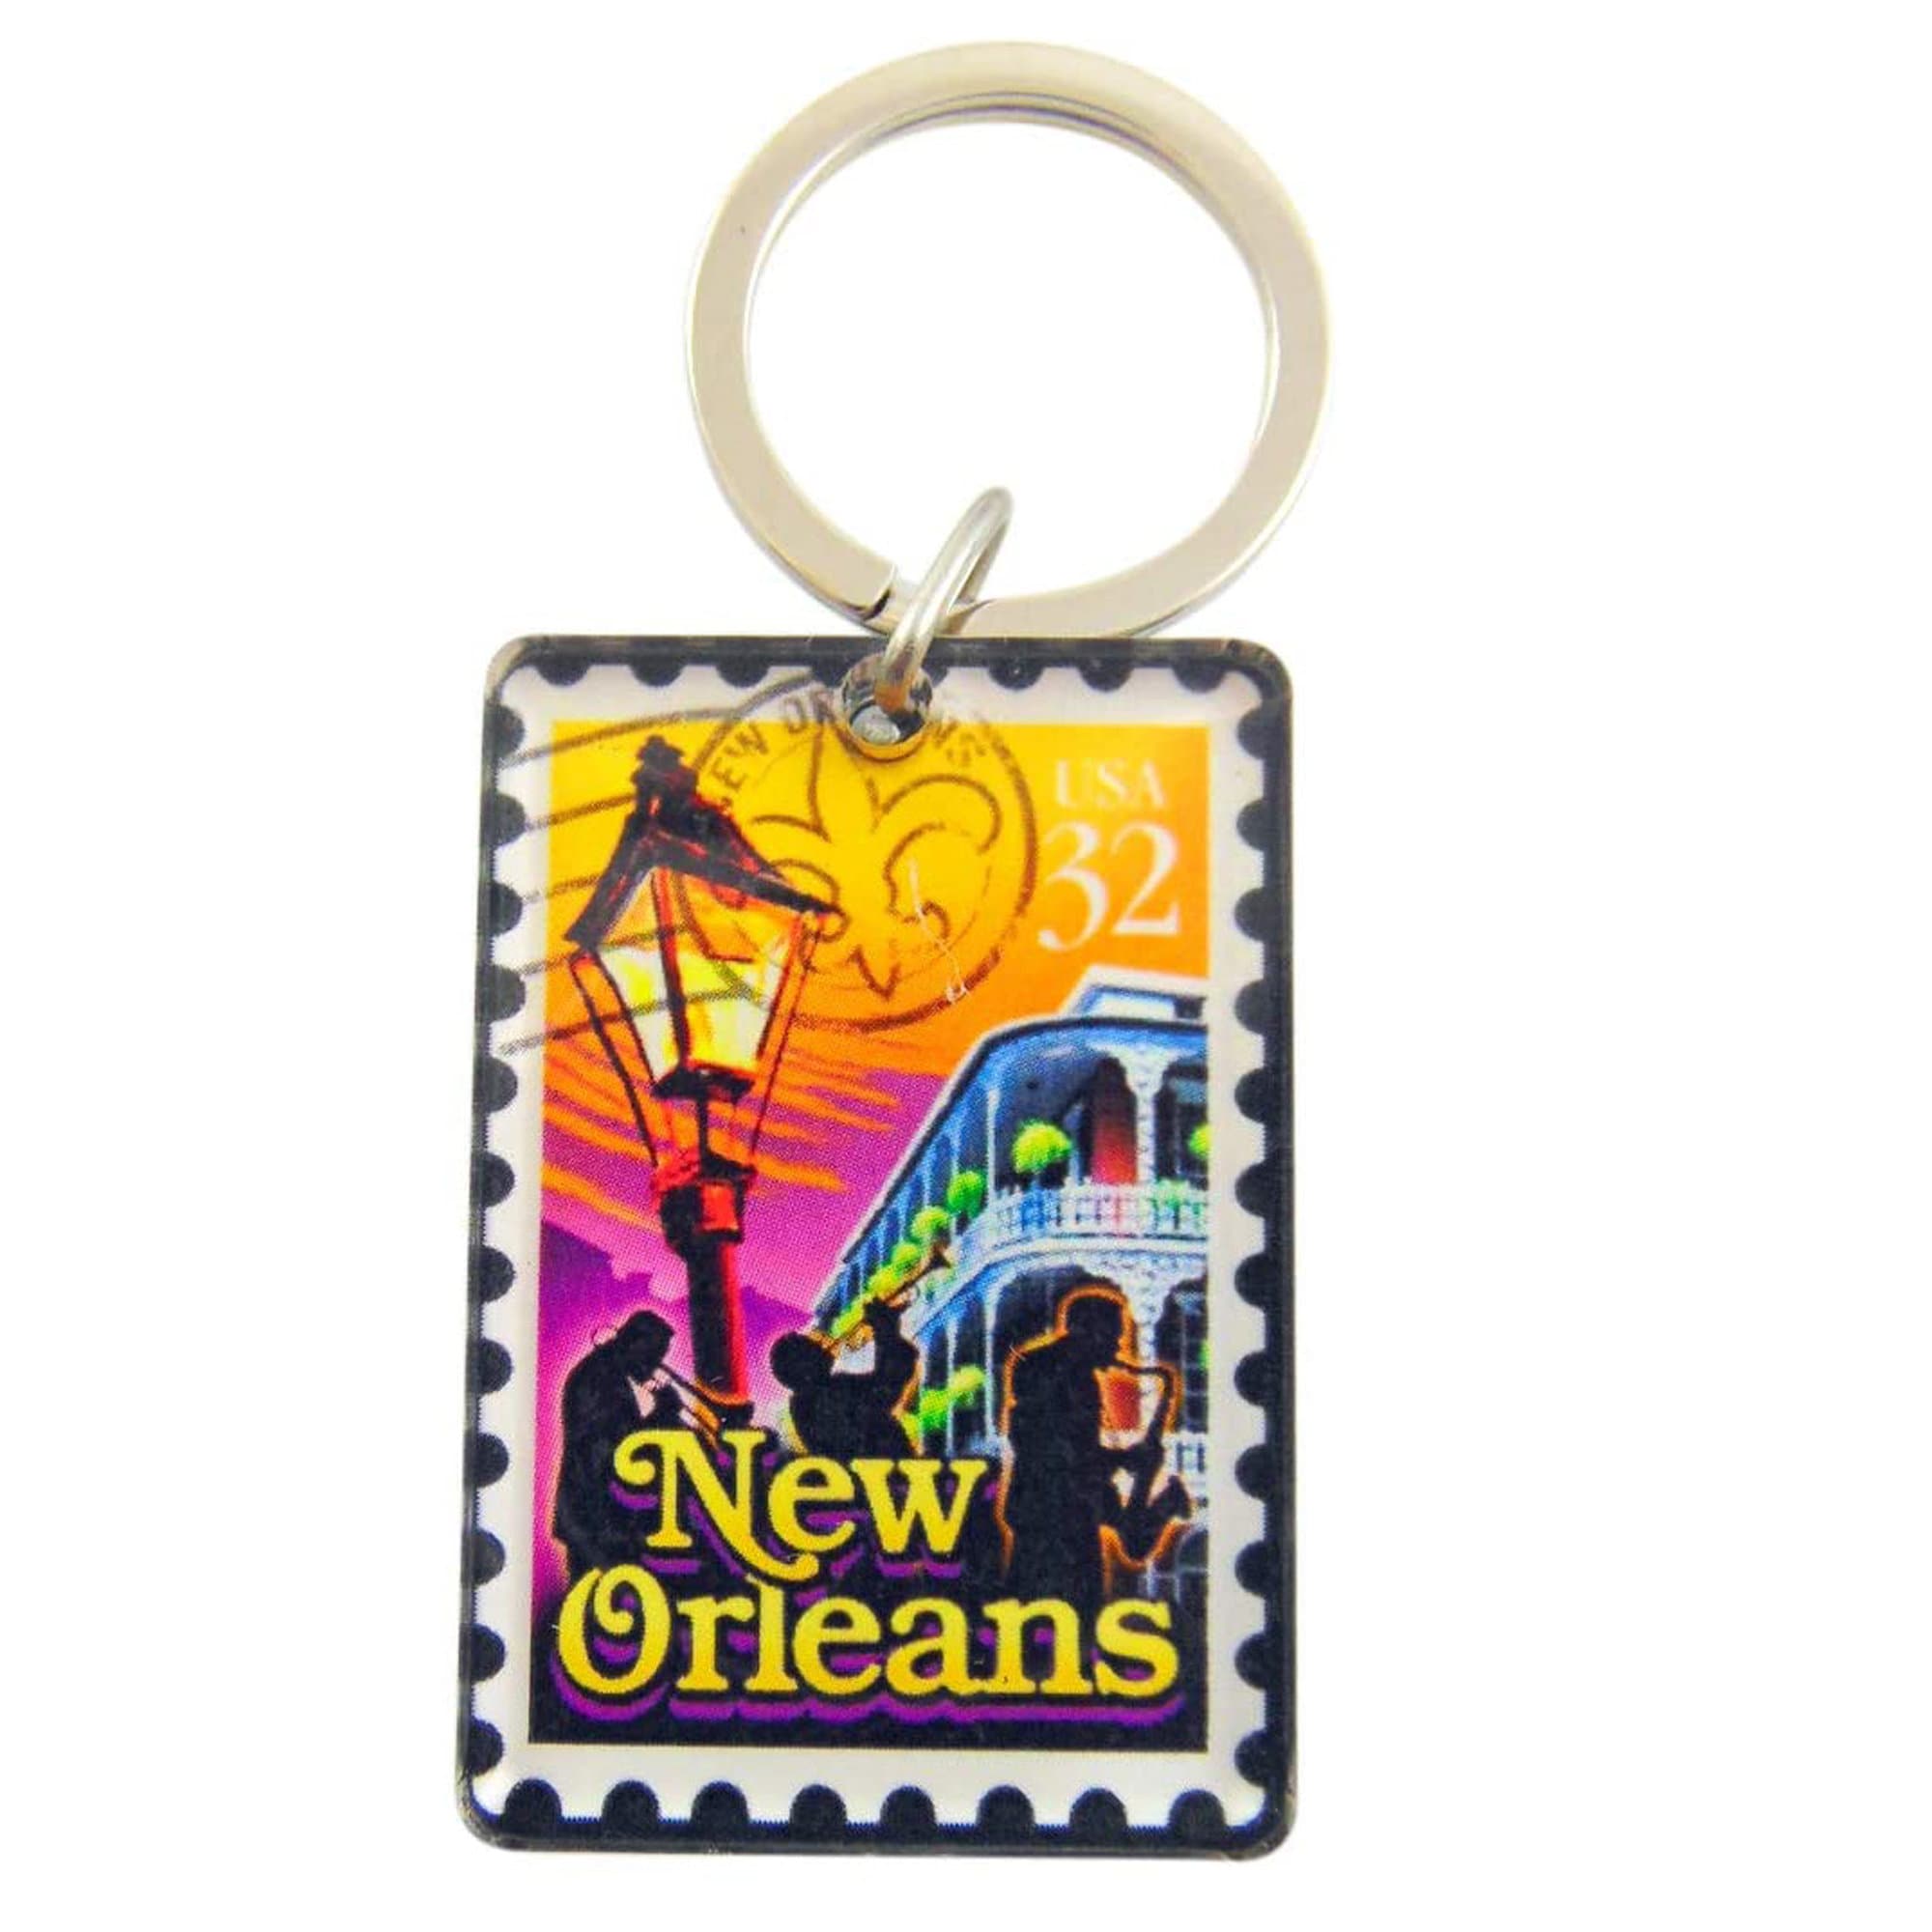 Lot of 60 New Louisiana Souvenir Keychains Just .50 cents each - Fast  Shipping!